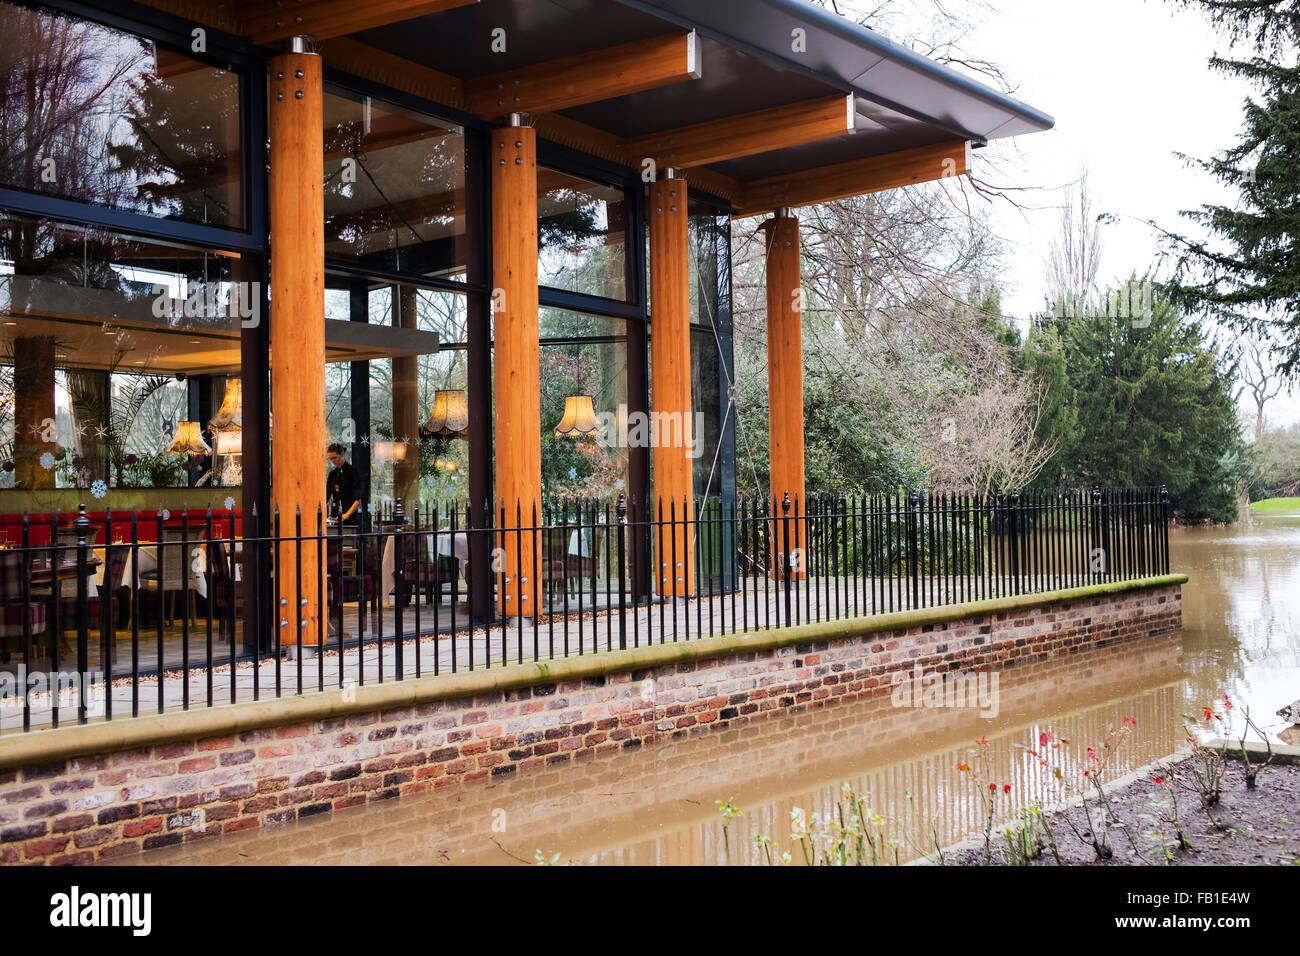 The 'Garden Room' of the 'Star Inn the City' above the Christmas 2015 flood waters, City of York, England, UK Stock Photo